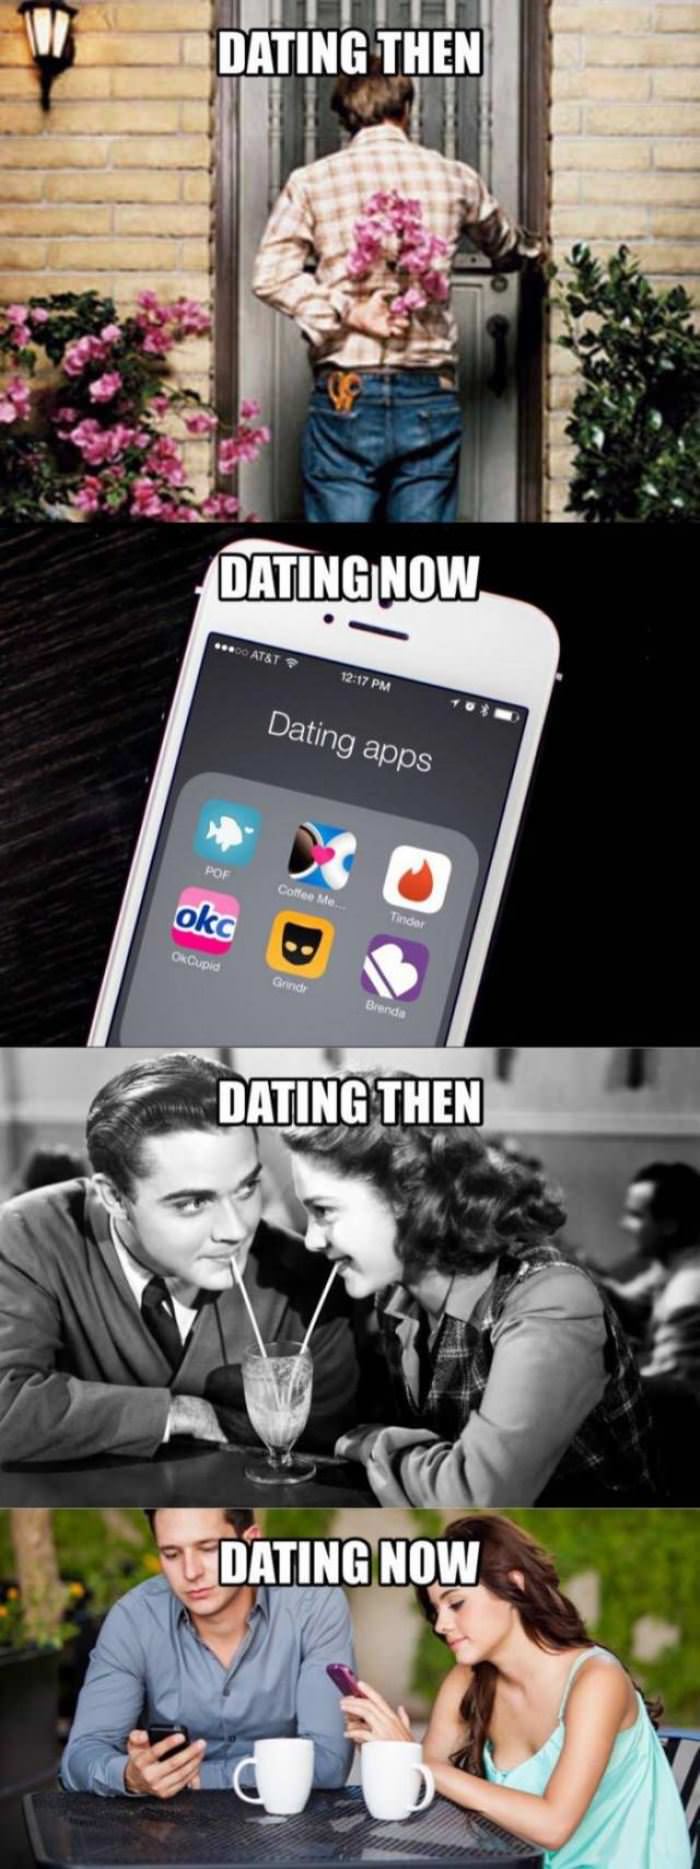 dating then and dating now funny picture